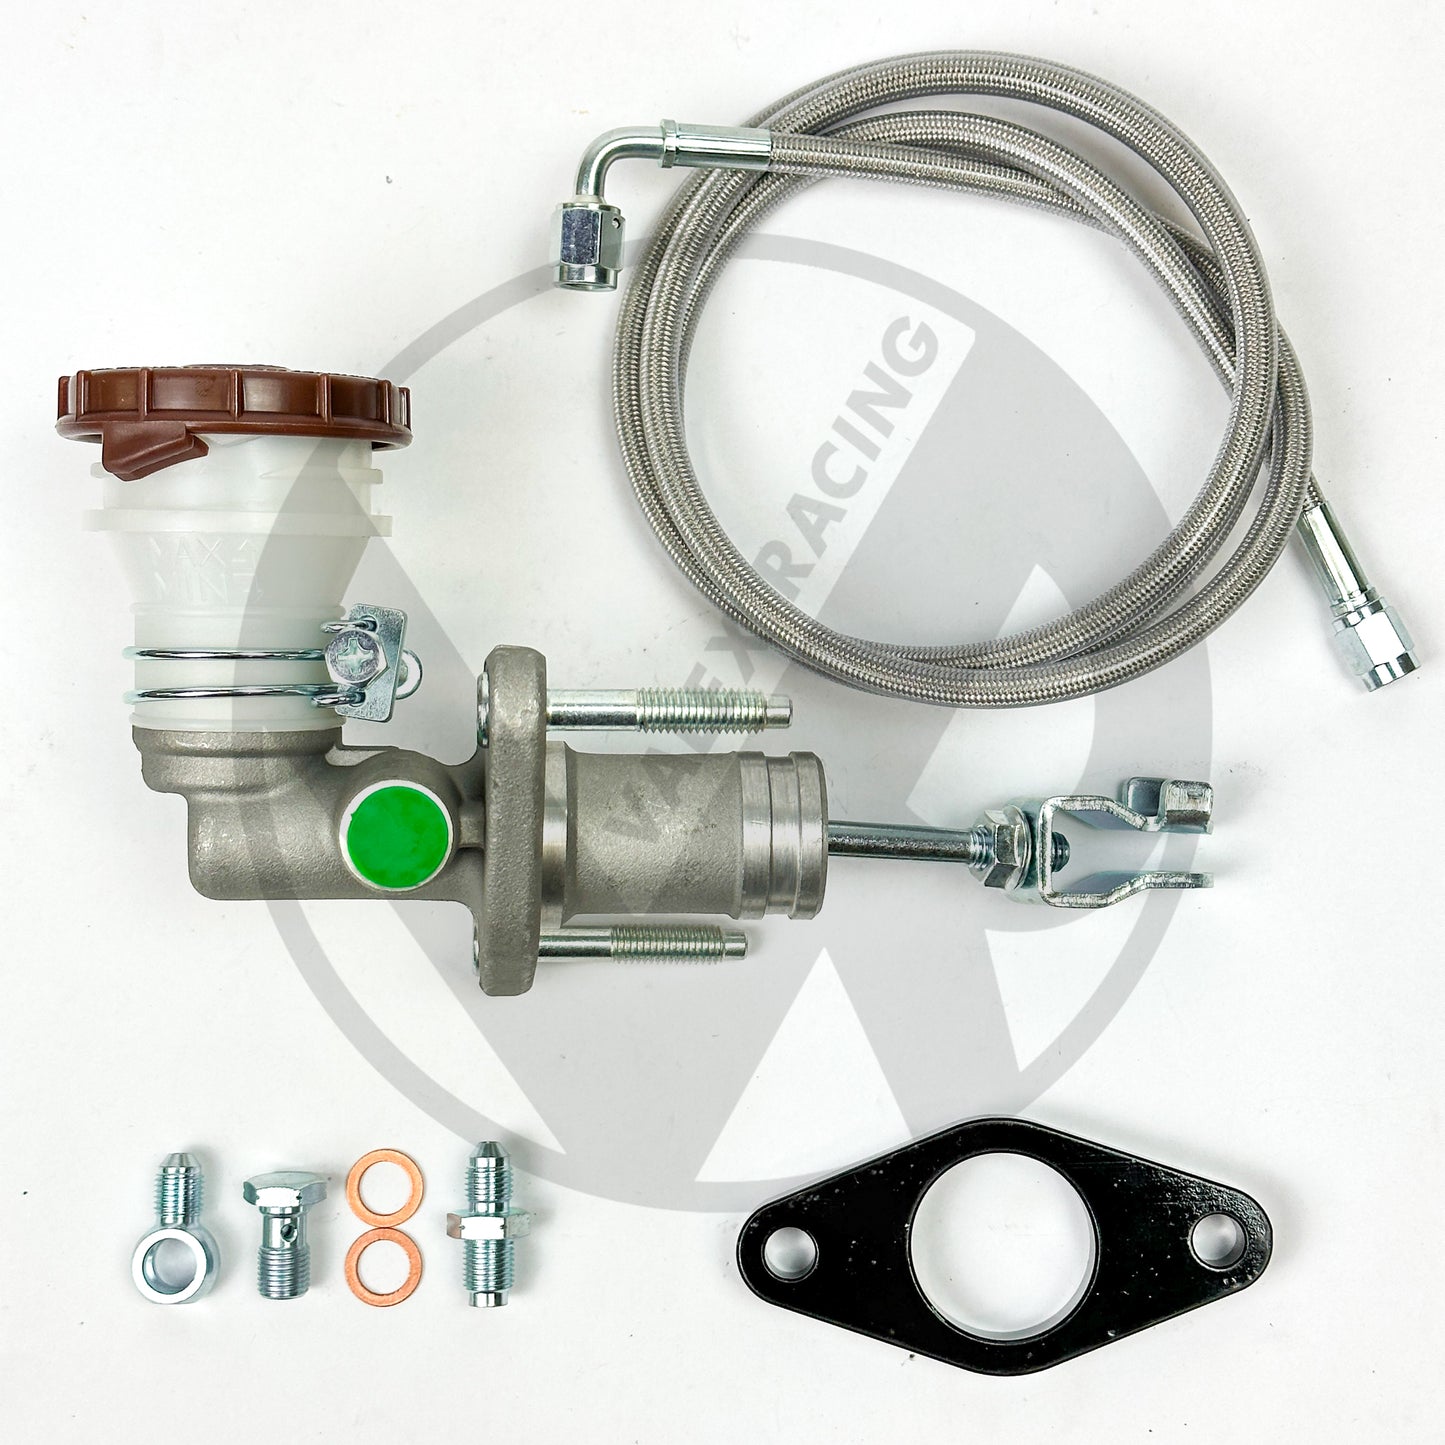 K Swap S2000 (S2K) Style Clutch Master Cylinder (CMC) Kit with Stainless Steel Clutch Line